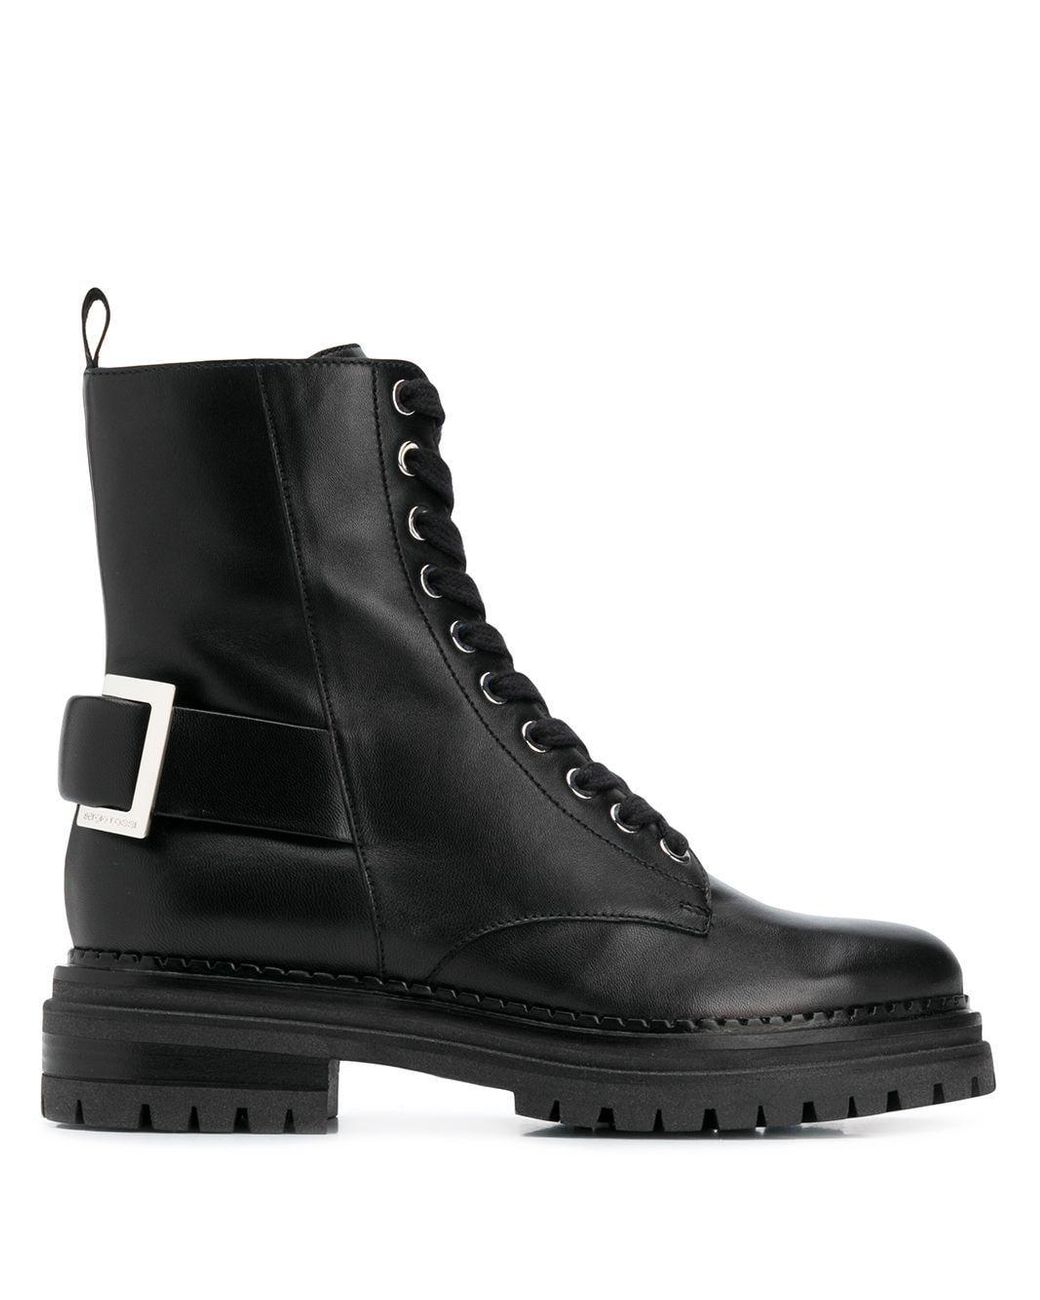 Sergio Rossi Leather Ankle Boots in Black - Lyst